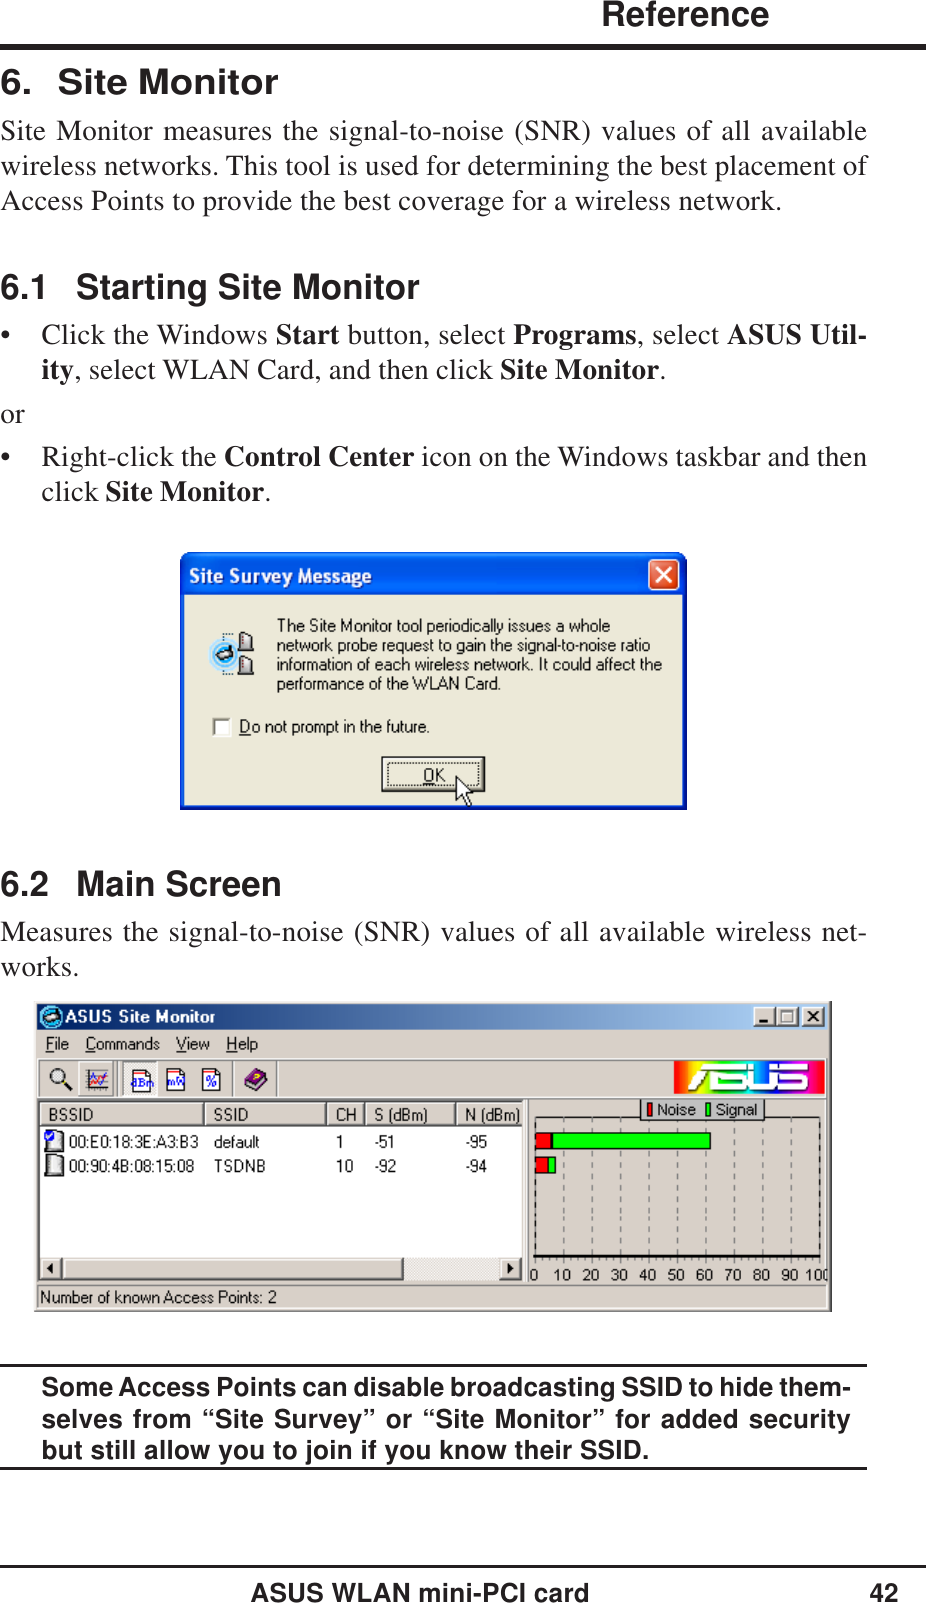 ASUS WLAN mini-PCI card 42              ReferenceChapter 36. Site MonitorSite Monitor measures the signal-to-noise (SNR) values of all availablewireless networks. This tool is used for determining the best placement ofAccess Points to provide the best coverage for a wireless network.6.1 Starting Site Monitor• Click the Windows Start button, select Programs, select ASUS Util-ity, select WLAN Card, and then click Site Monitor.or• Right-click the Control Center icon on the Windows taskbar and thenclick Site Monitor.6.2 Main ScreenMeasures the signal-to-noise (SNR) values of all available wireless net-works.Some Access Points can disable broadcasting SSID to hide them-selves from “Site Survey” or “Site Monitor” for added securitybut still allow you to join if you know their SSID.